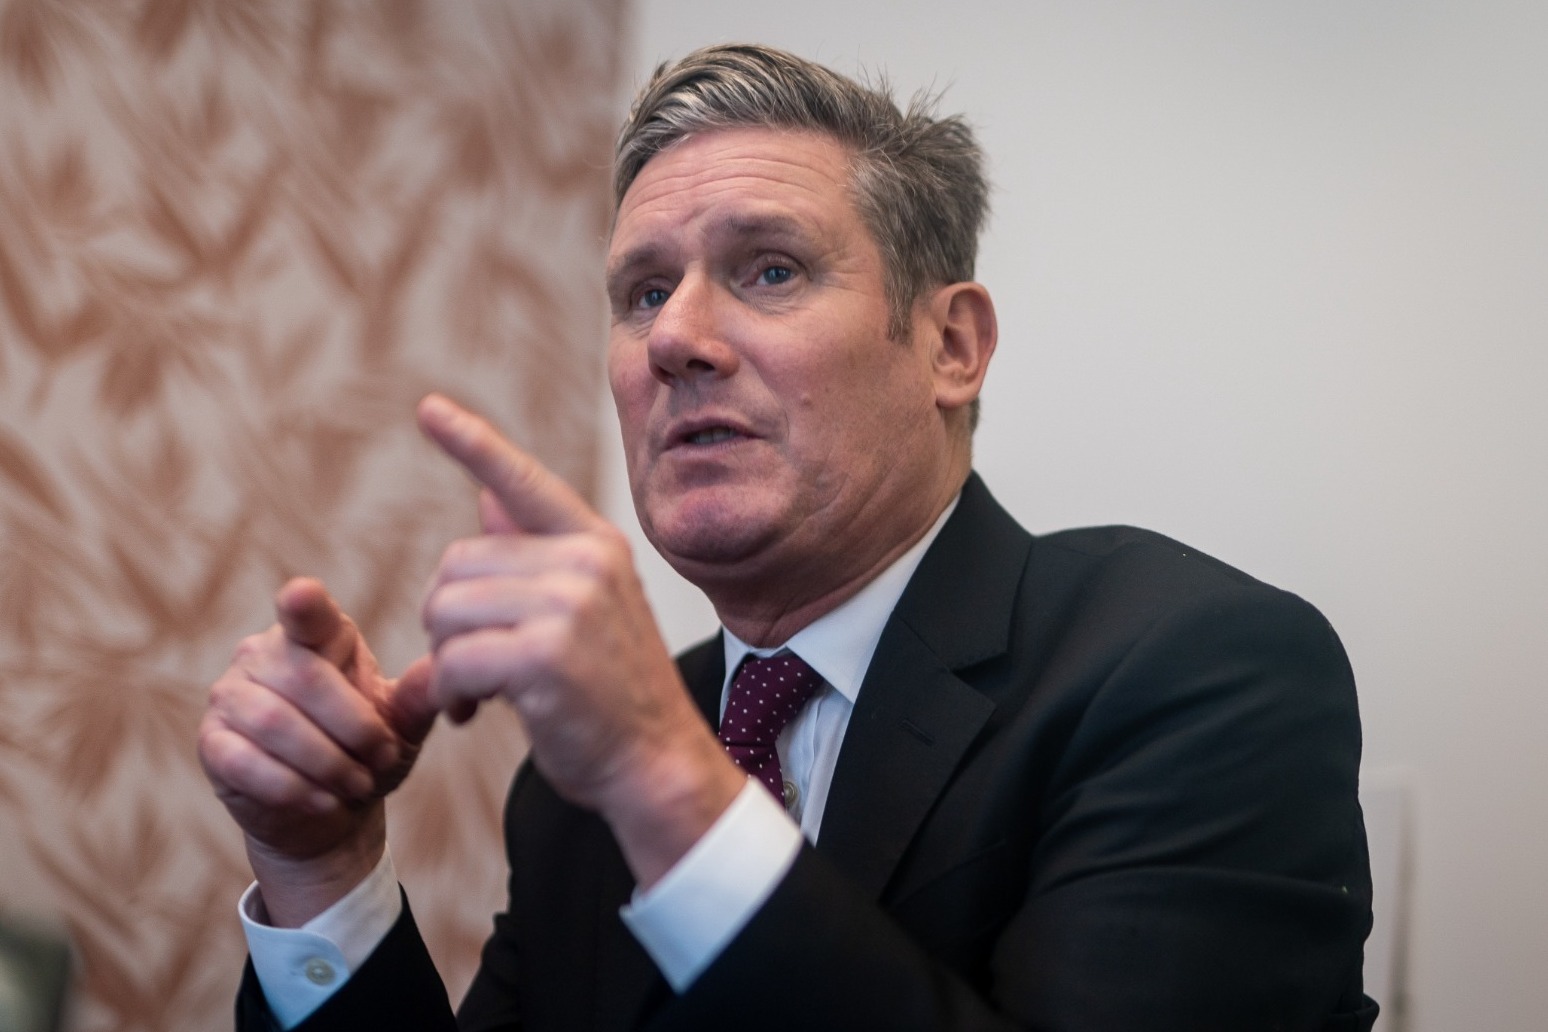 Sir Keir Starmer to warn businesses ‘days of low pay and cheap labour must end’ 